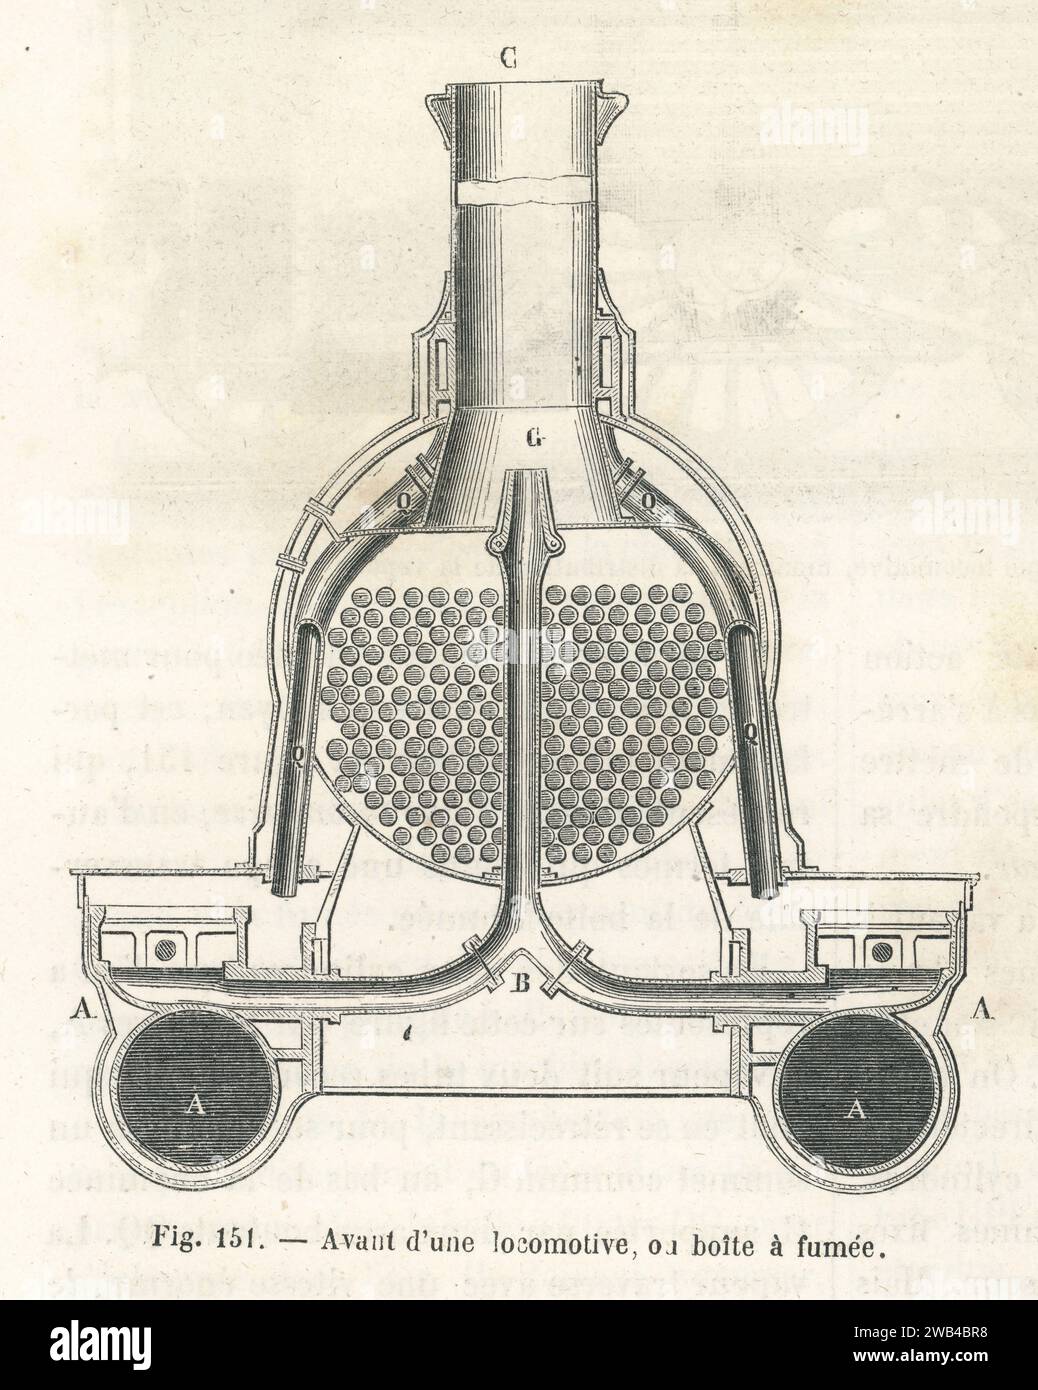 Diagram of the front of a 1865 steam locomotive, or smokebox. This is the part that collects the hot gases before they are exhausted through the chimney.  Illustration from 'Les Merveilles de la science ou description populaire des inventions modernes' written by Louis Figuier and published in 1867 by Furne, Jouvet et Cie. Stock Photo